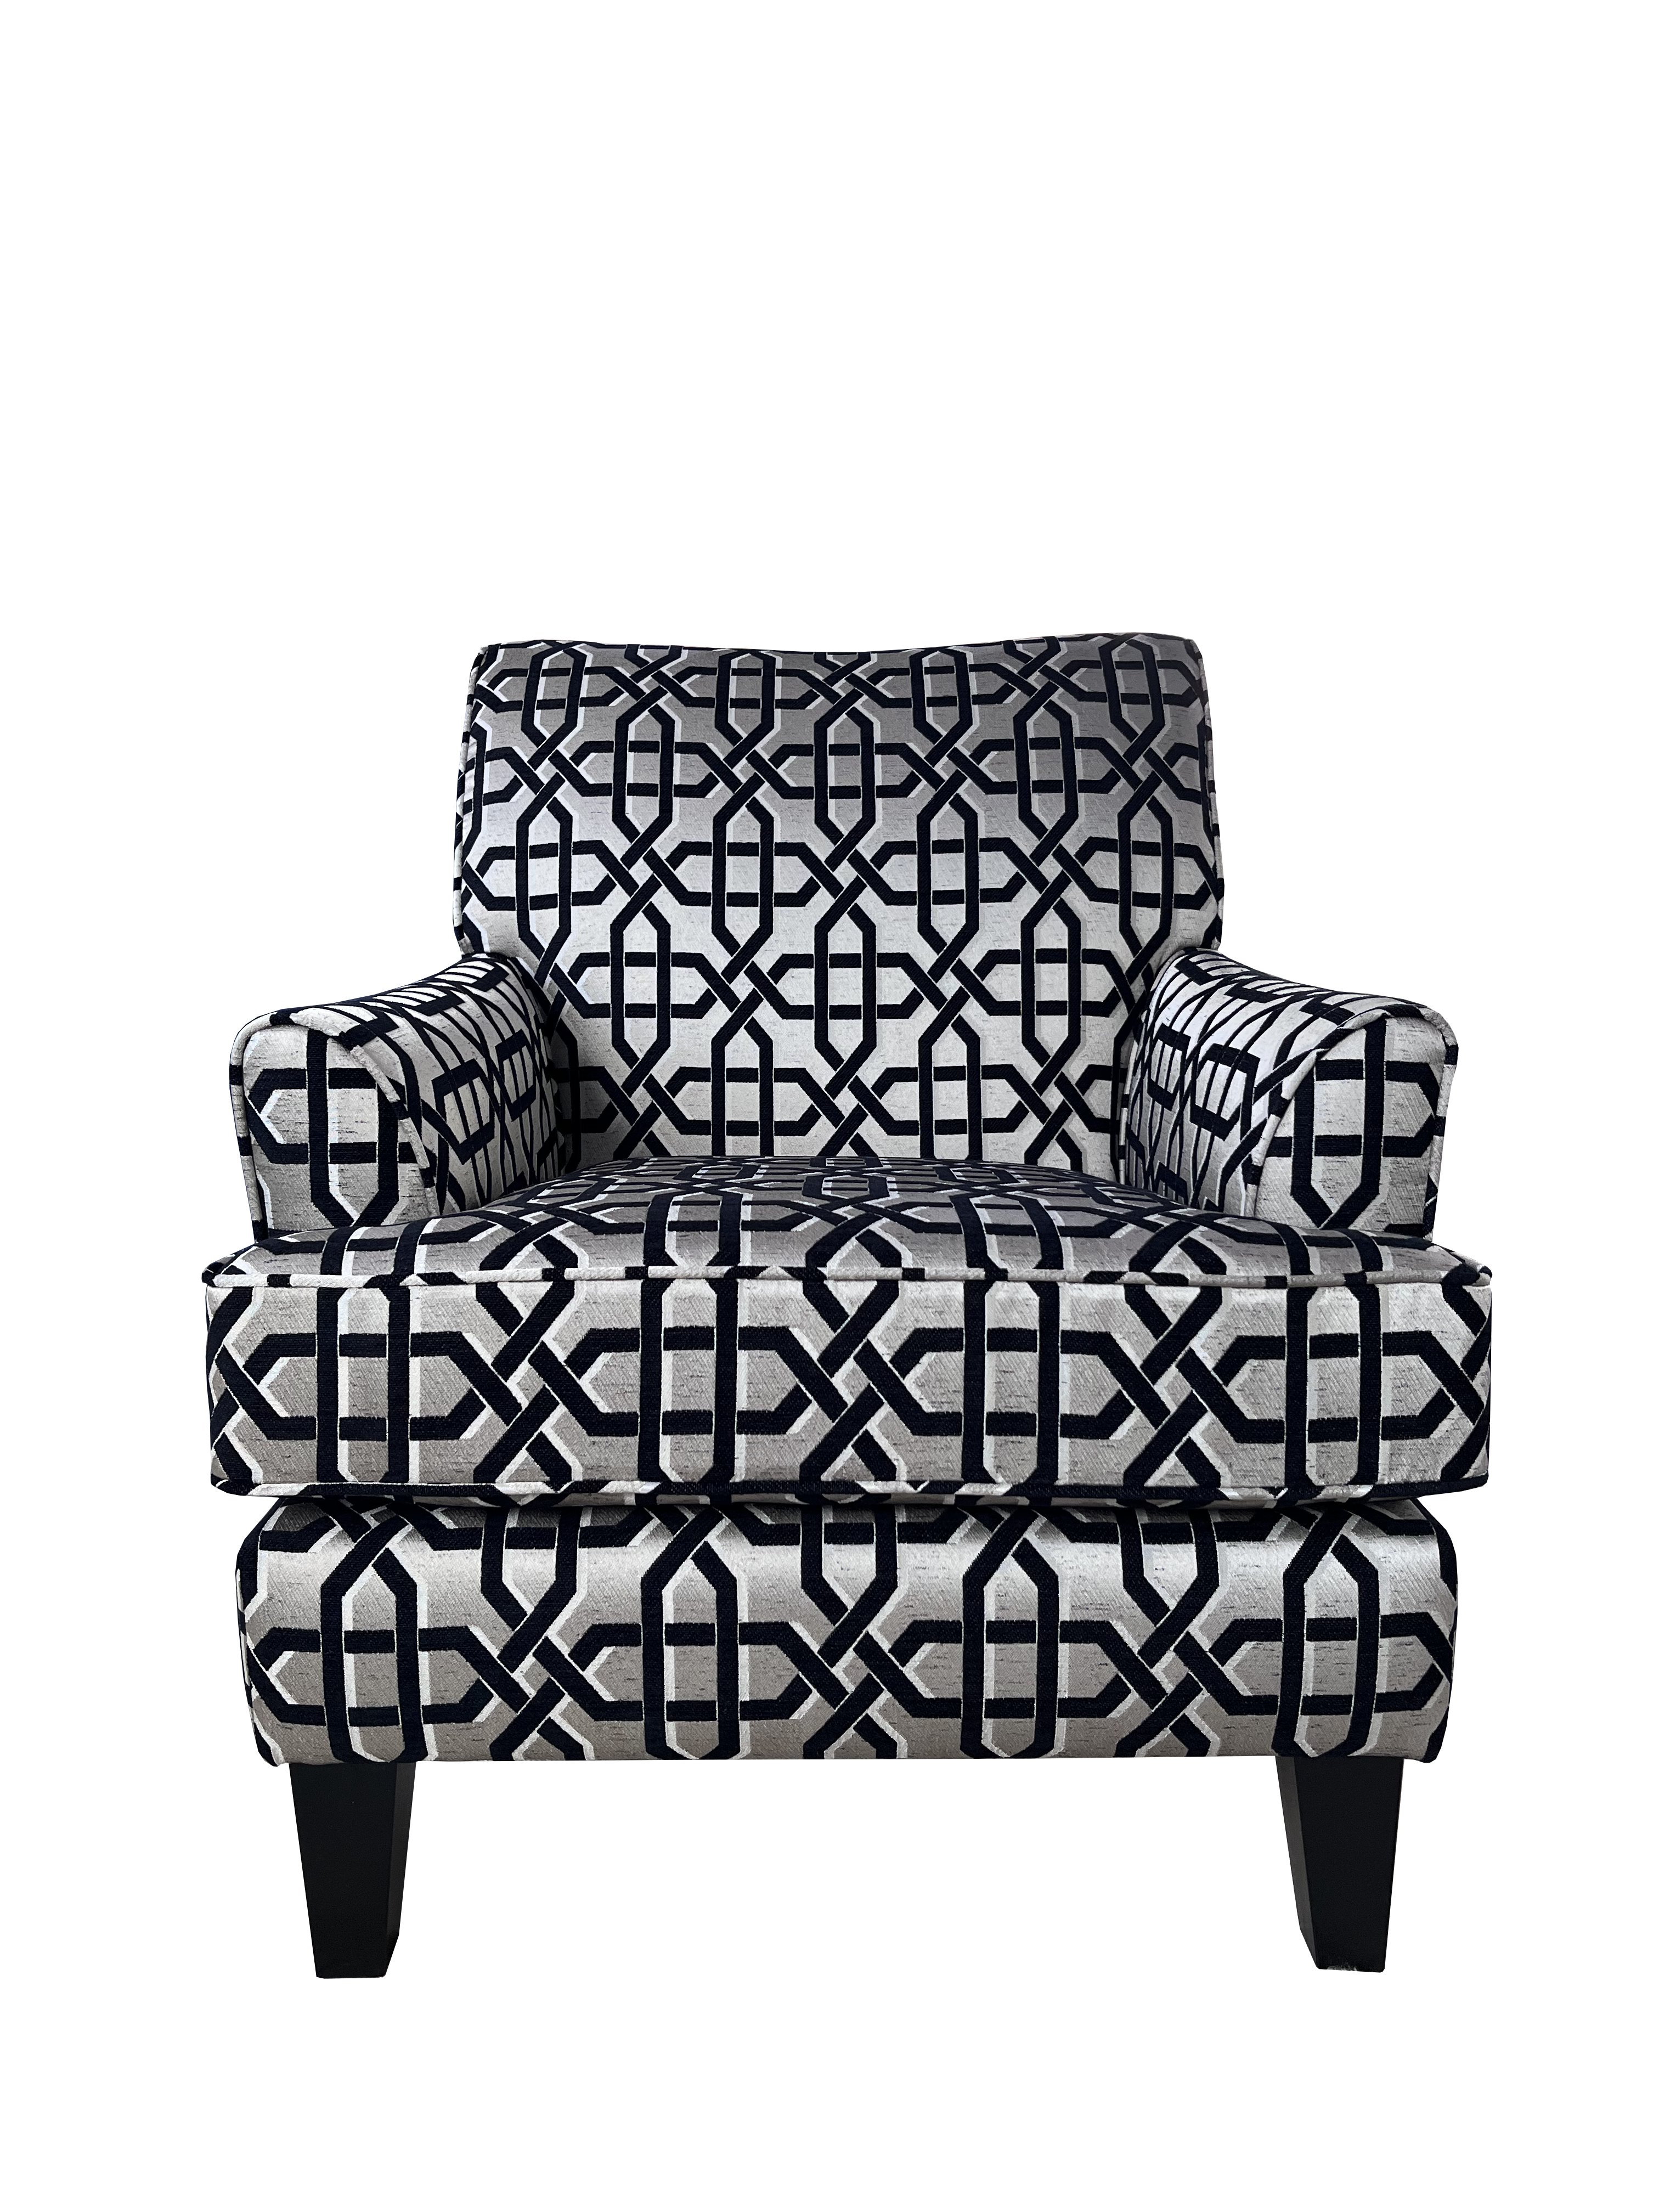 Chelsea Sofa Accent Chair - Fabric Price Band 1